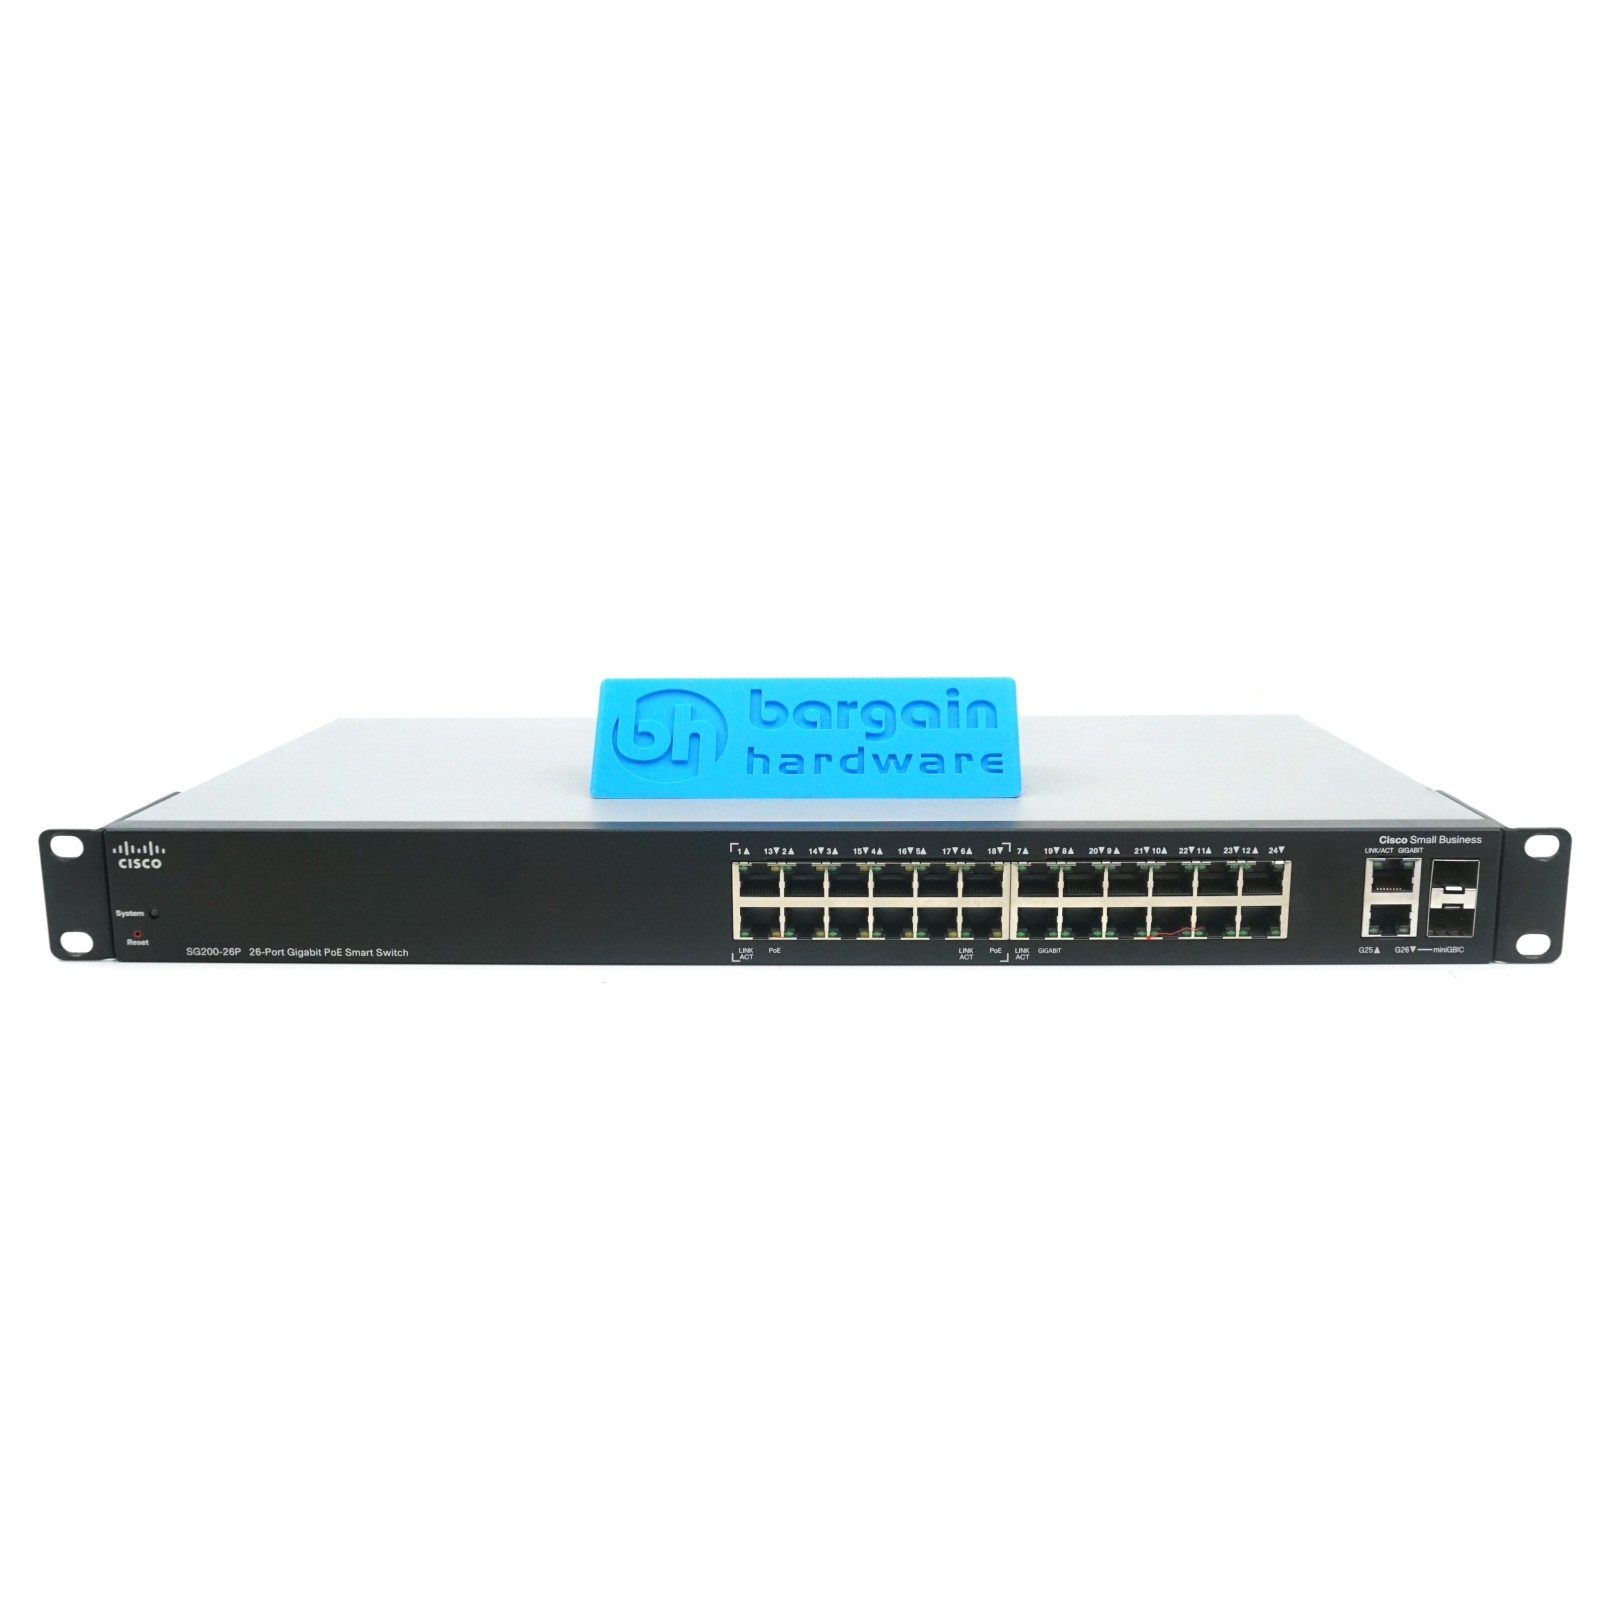 Cisco Small Business SG200-26P 26 Port RJ-45 PoE Switch With Ears